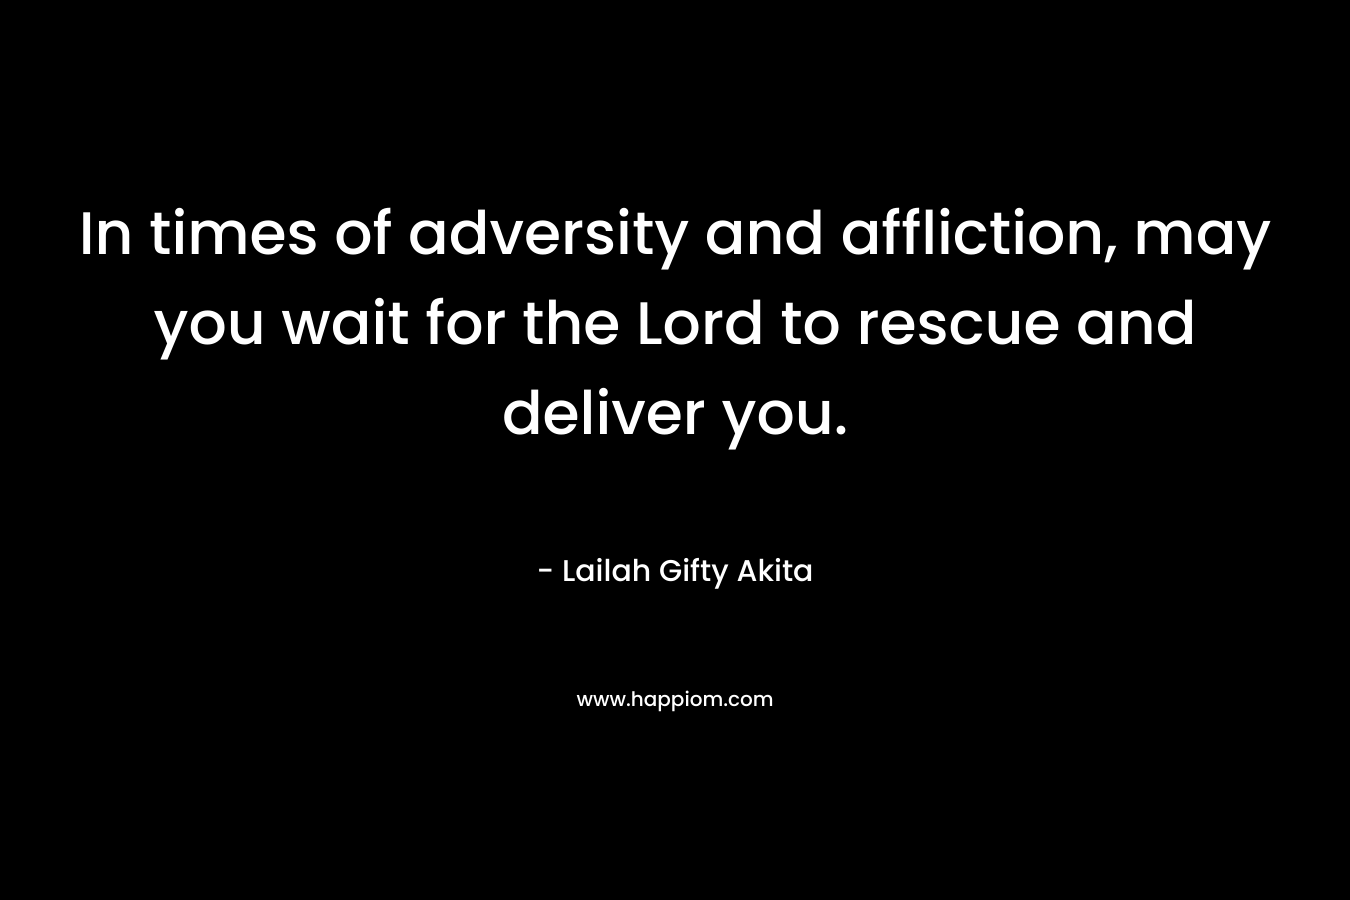 In times of adversity and affliction, may you wait for the Lord to rescue and deliver you.